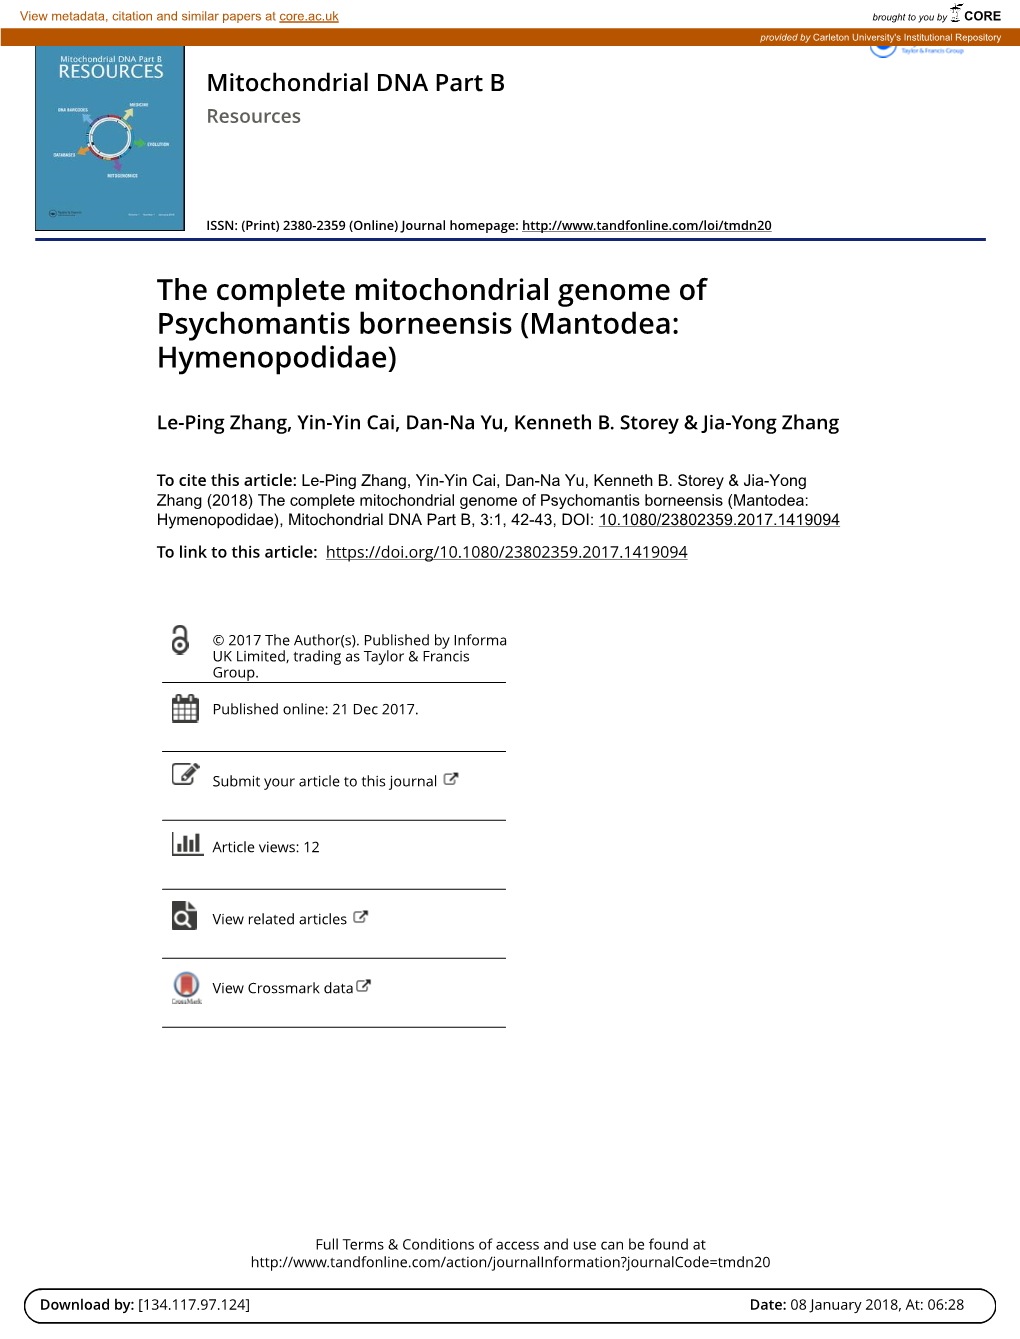 The Complete Mitochondrial Genome of Psychomantis Borneensis (Mantodea: Hymenopodidae)